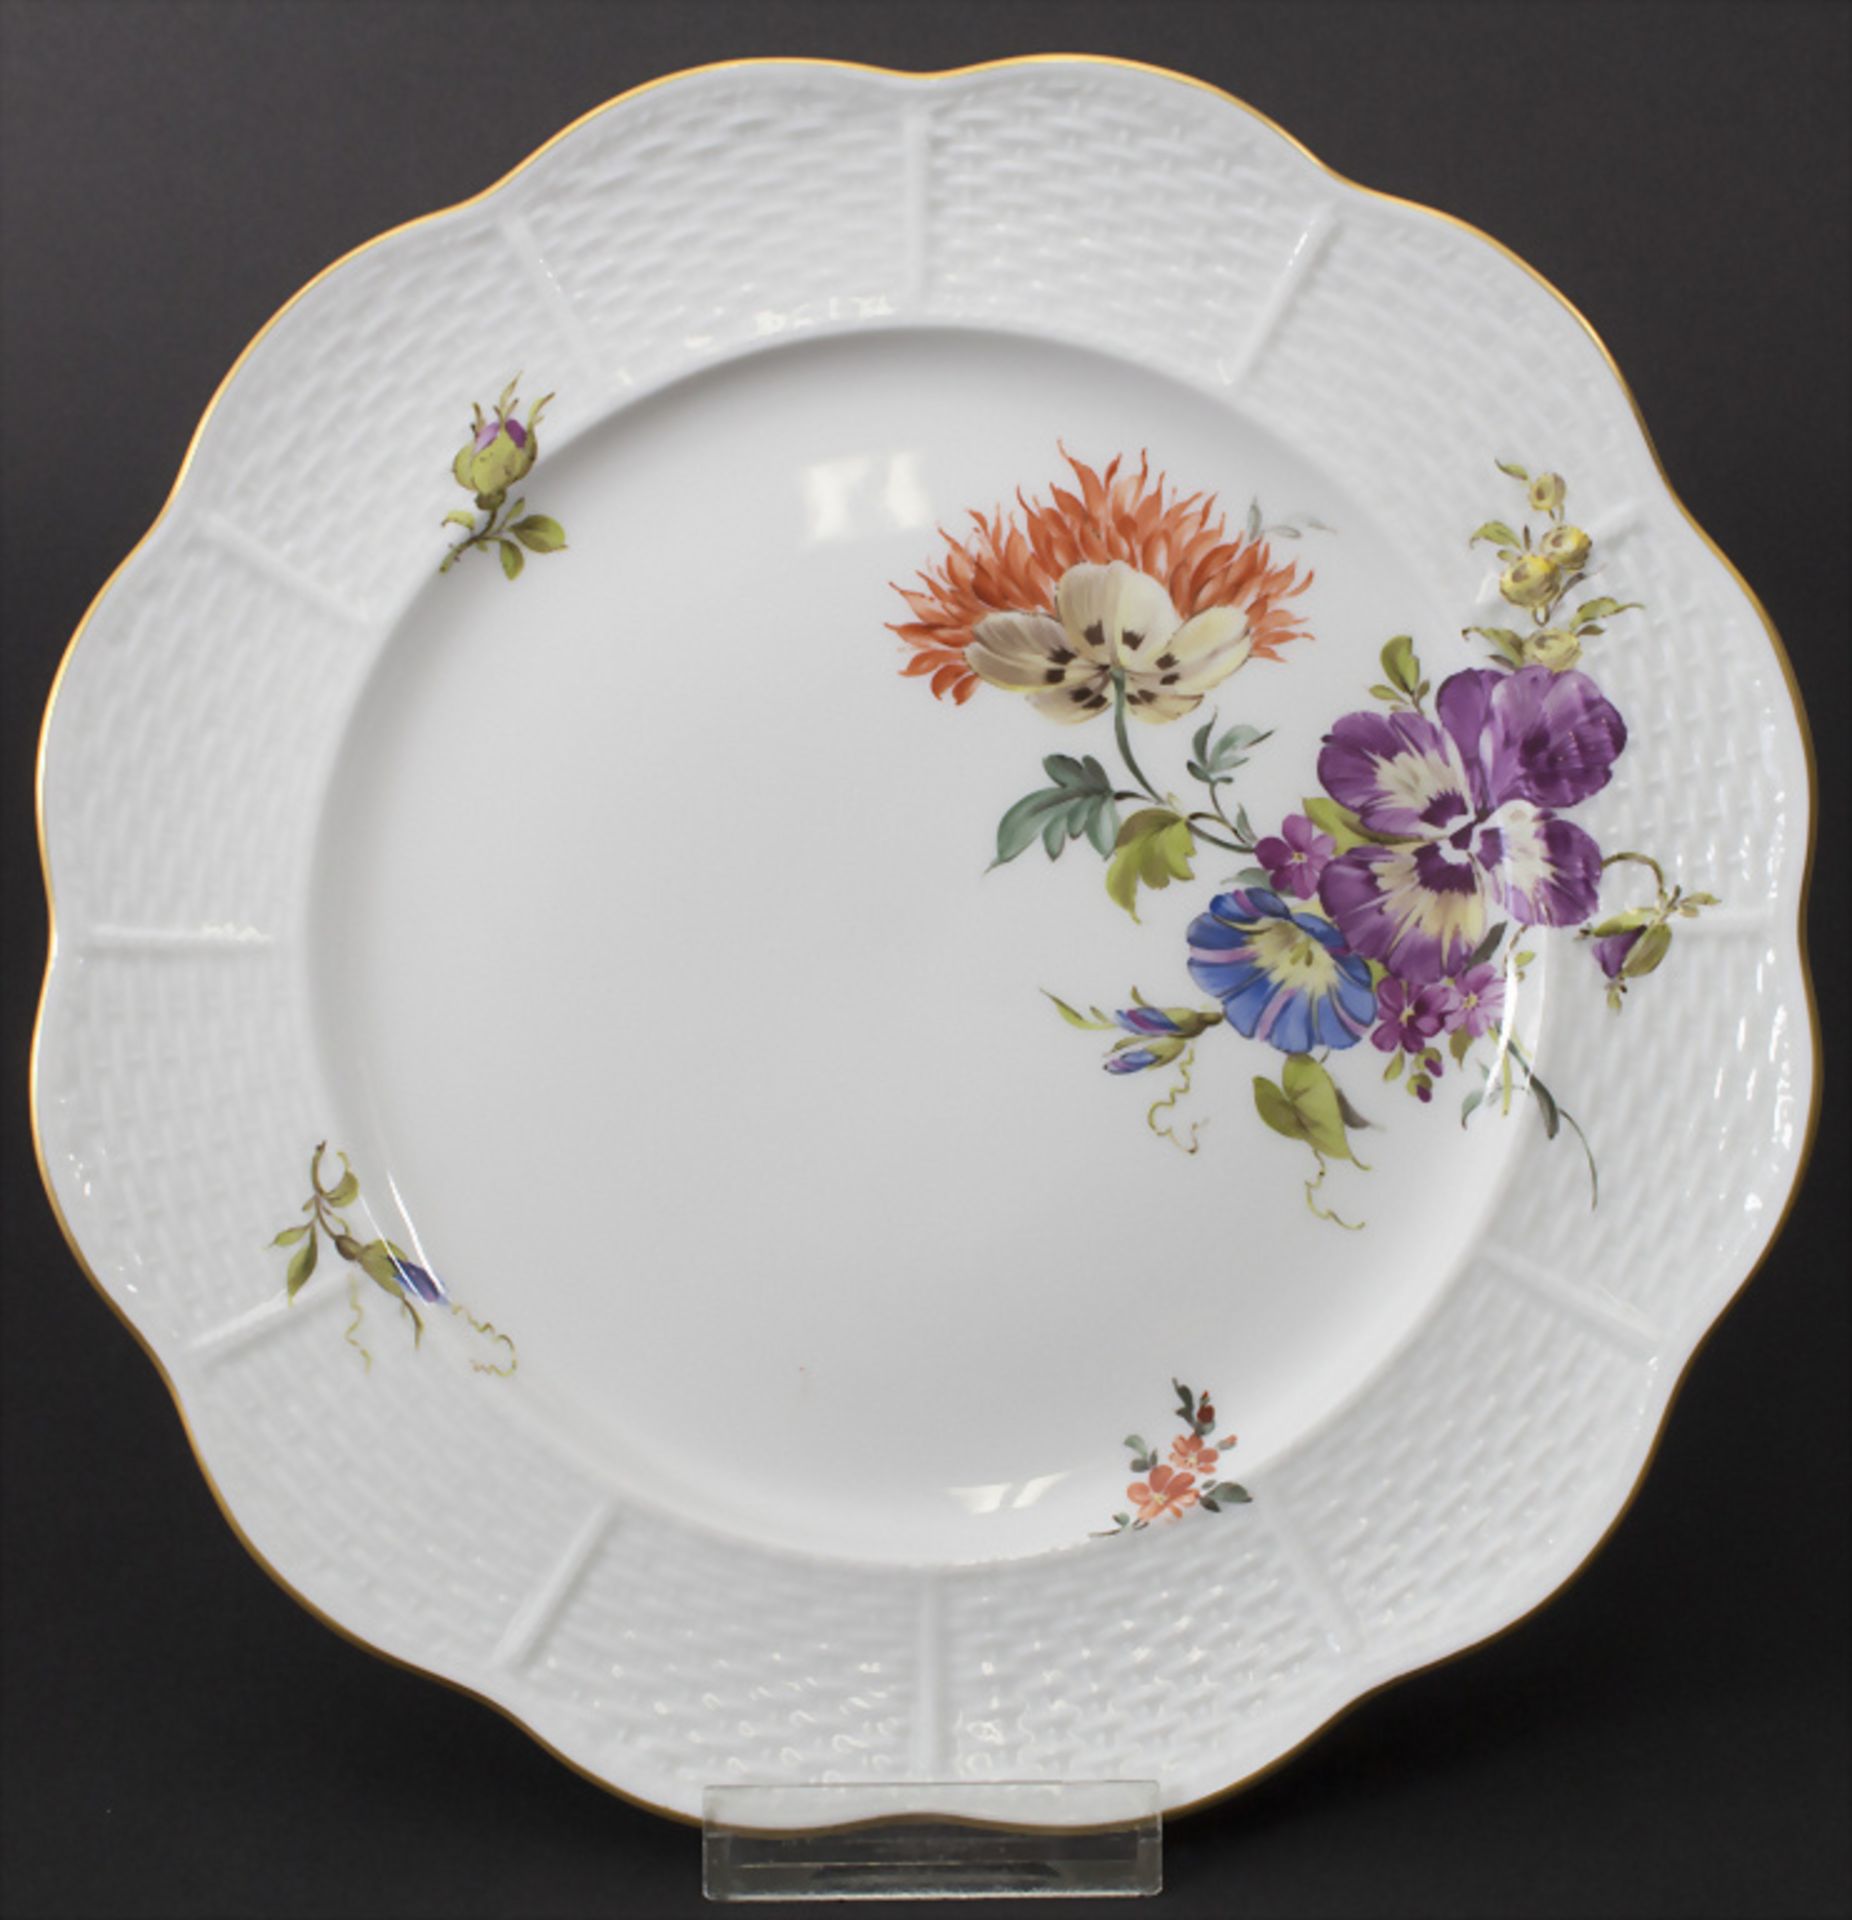 Teller mit Blumenmalerei / A plate with flowers, Ludwigsburg, Ende 20. Jh.